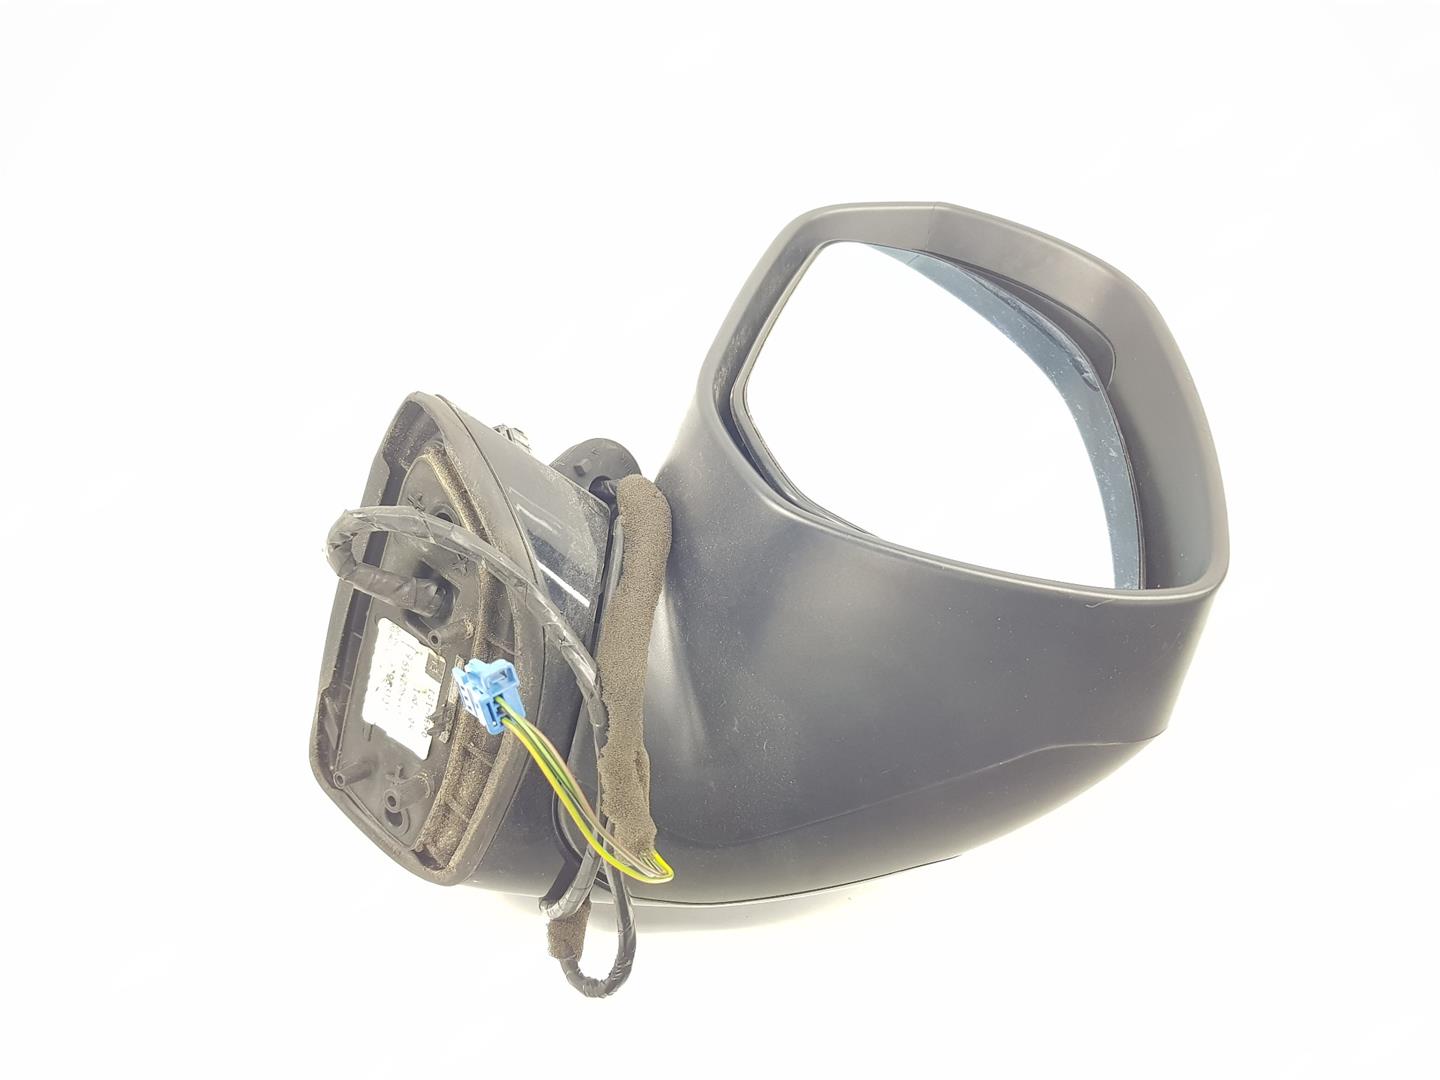 CITROËN C4 Picasso 1 generation (2006-2013) Left Side Wing Mirror 96542254XT, 8153H4, COLORNEGROONICEEXY 24245298